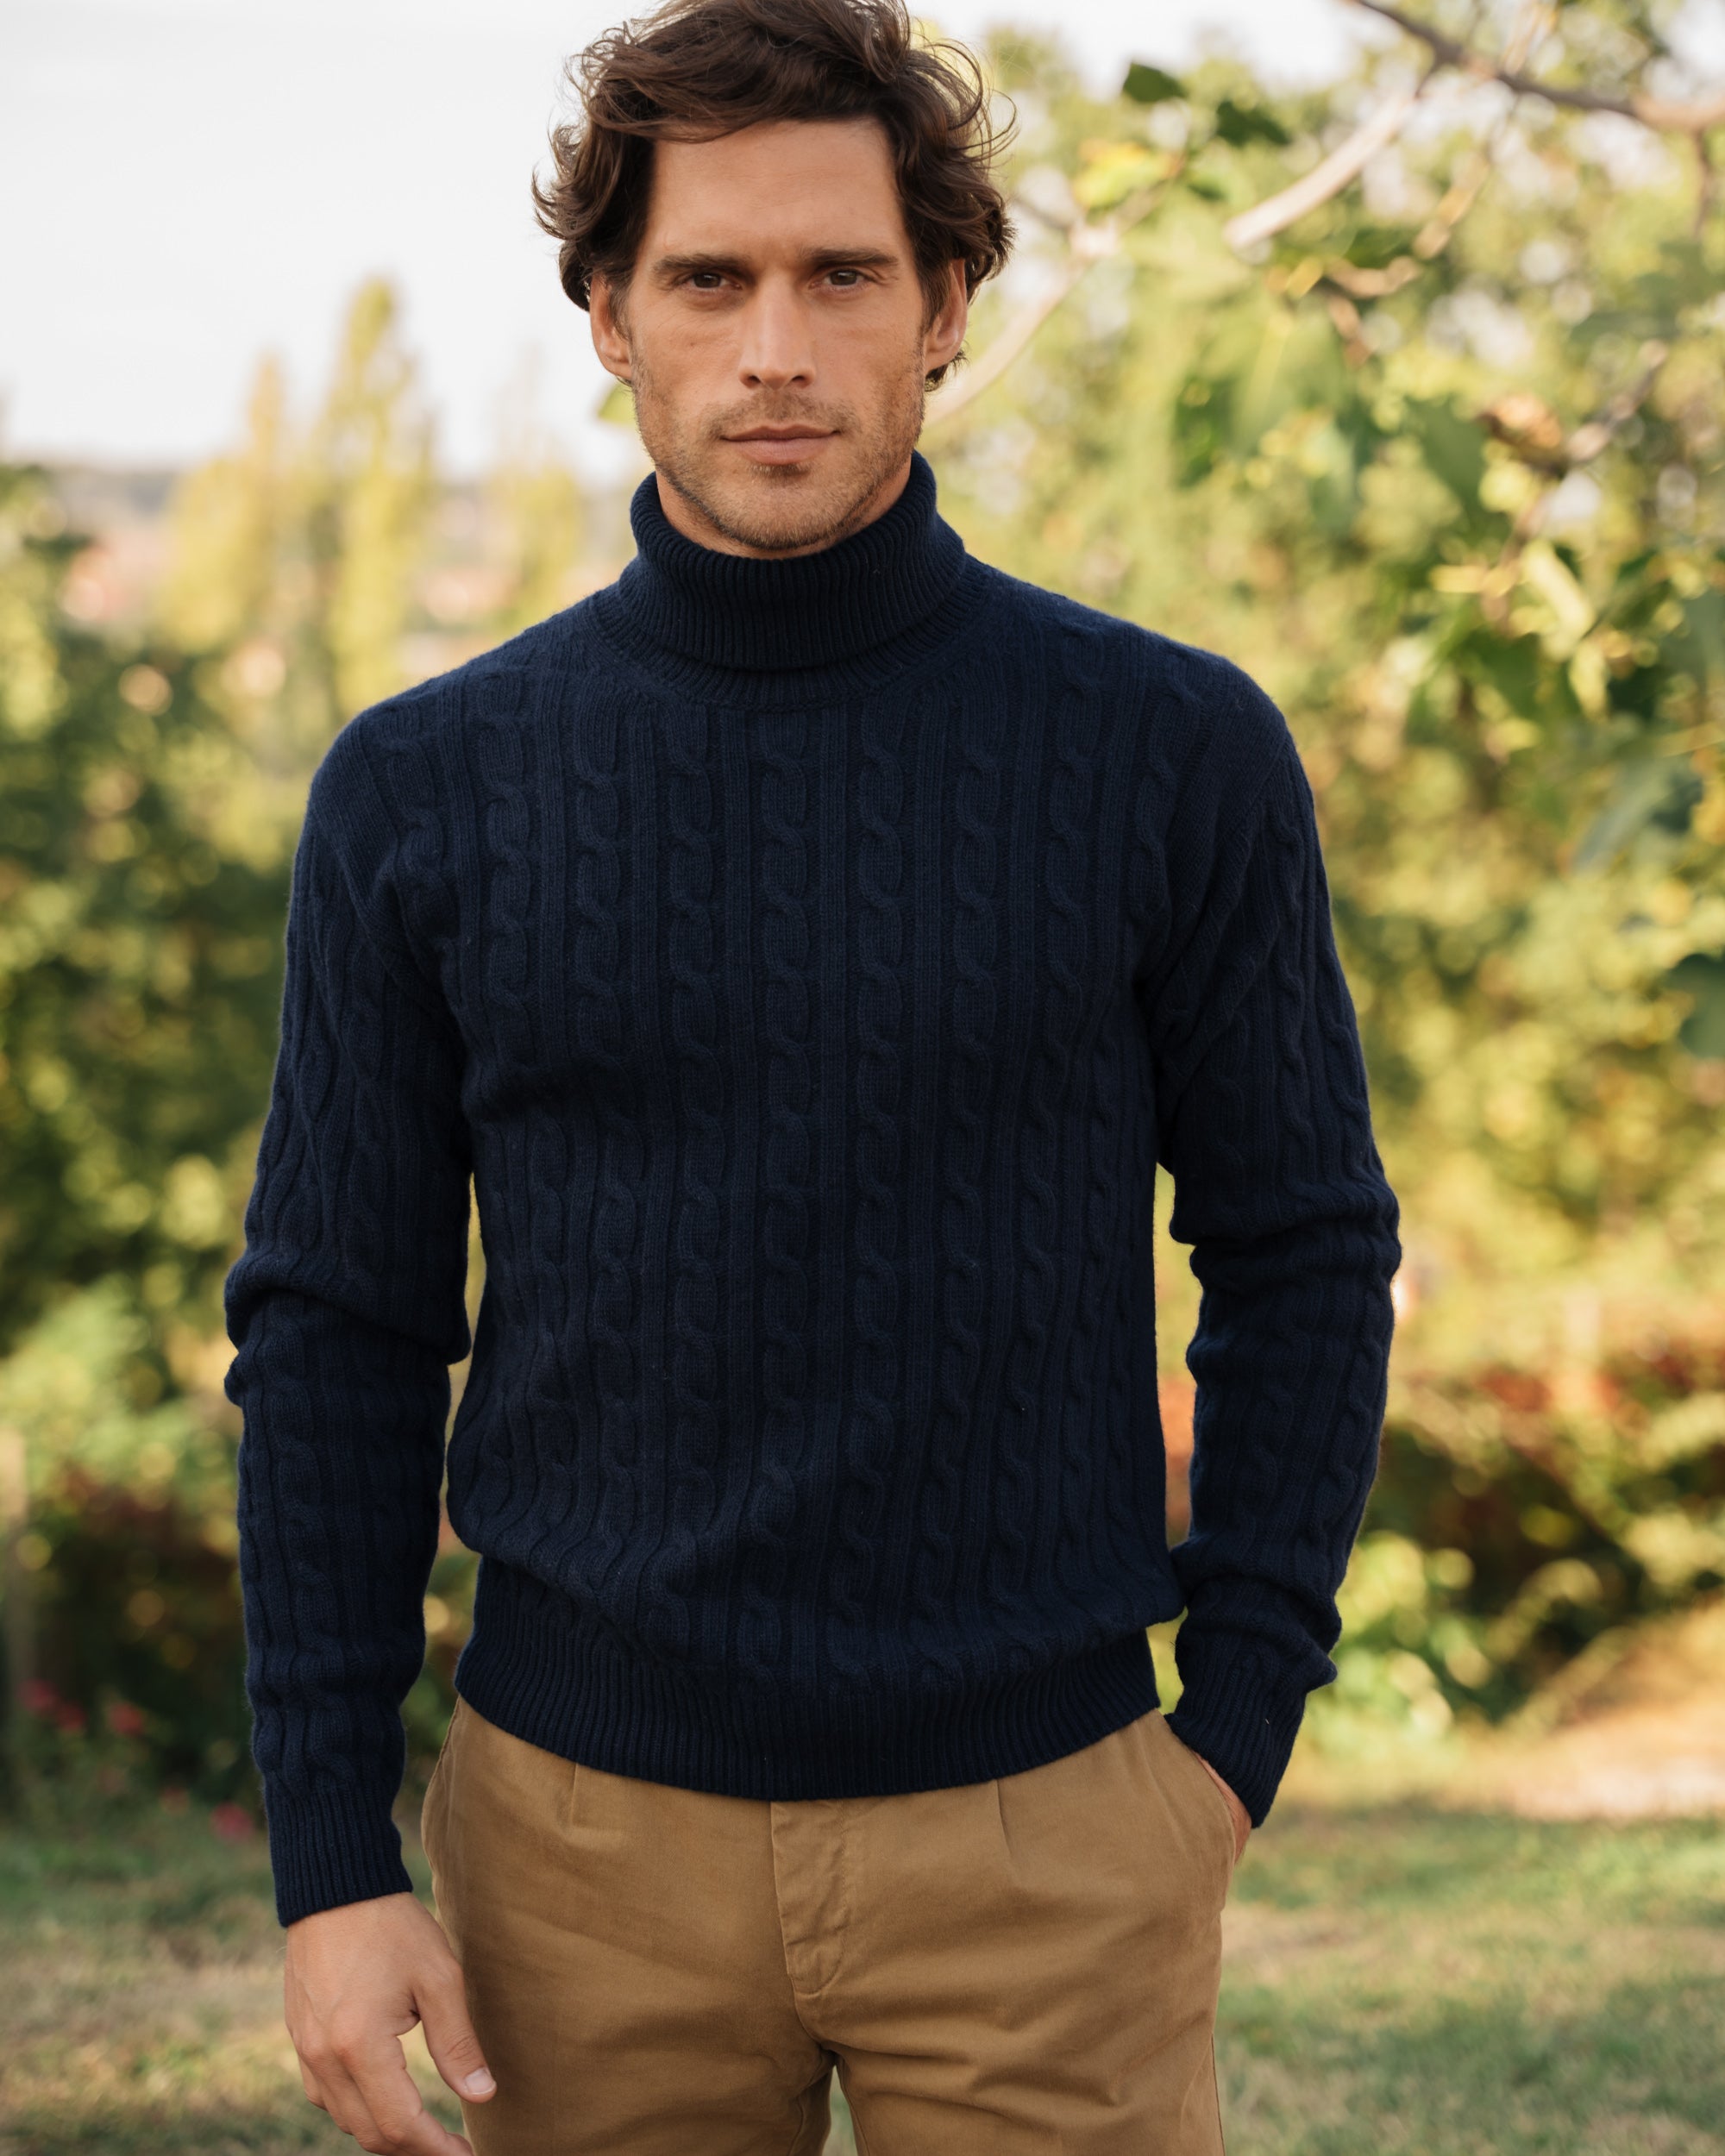 Velasca | Men’s turtleneck sweater. Made with love in Italy